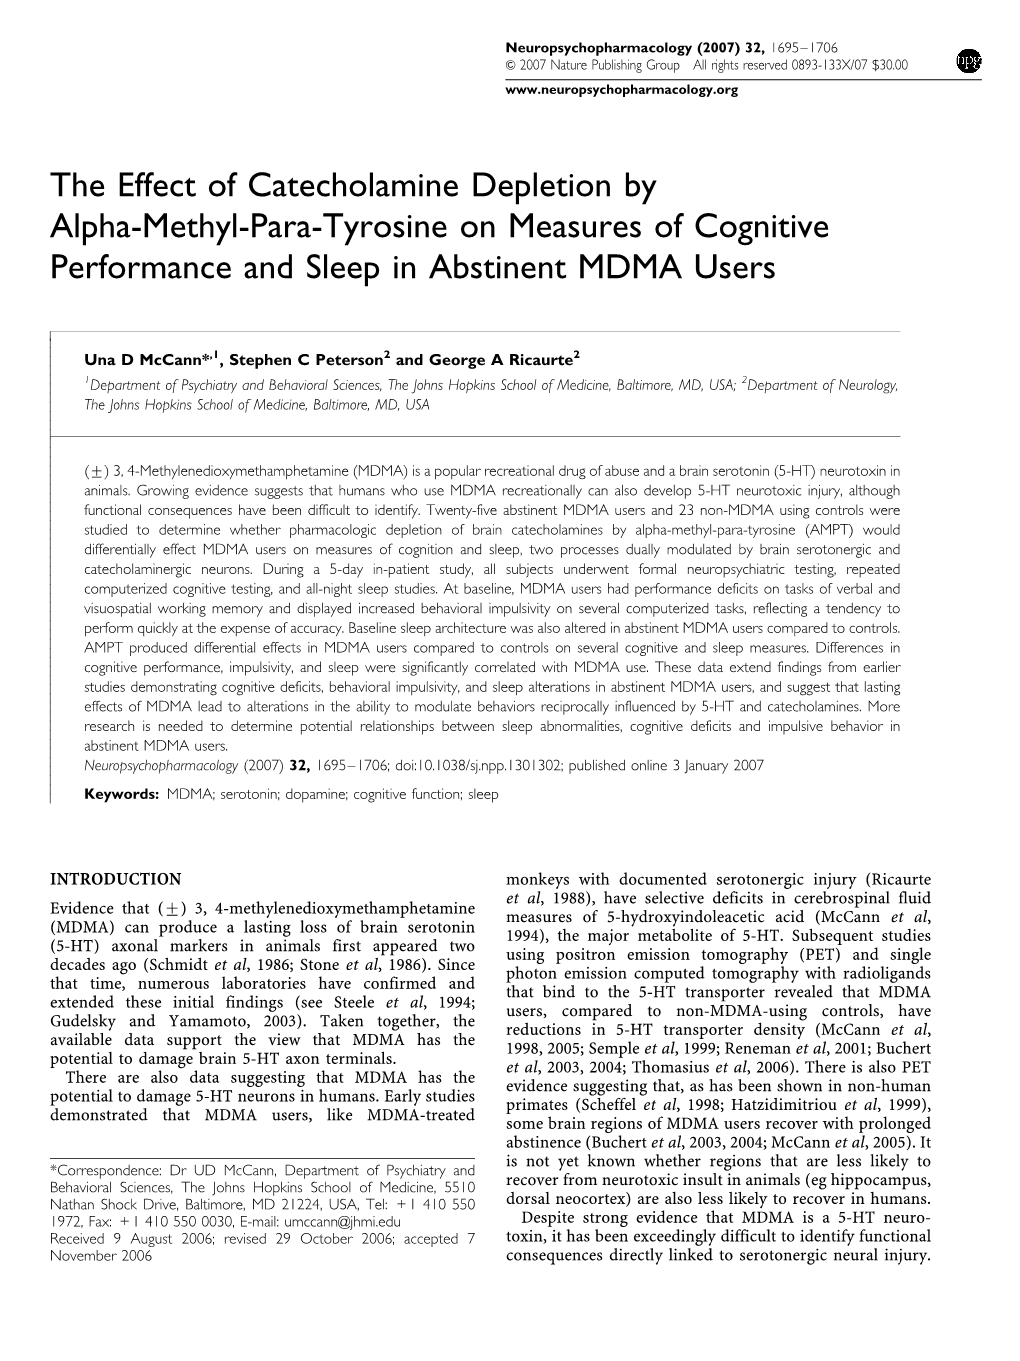 The Effect of Catecholamine Depletion by Alpha-Methyl-Para-Tyrosine on Measures of Cognitive Performance and Sleep in Abstinent MDMA Users